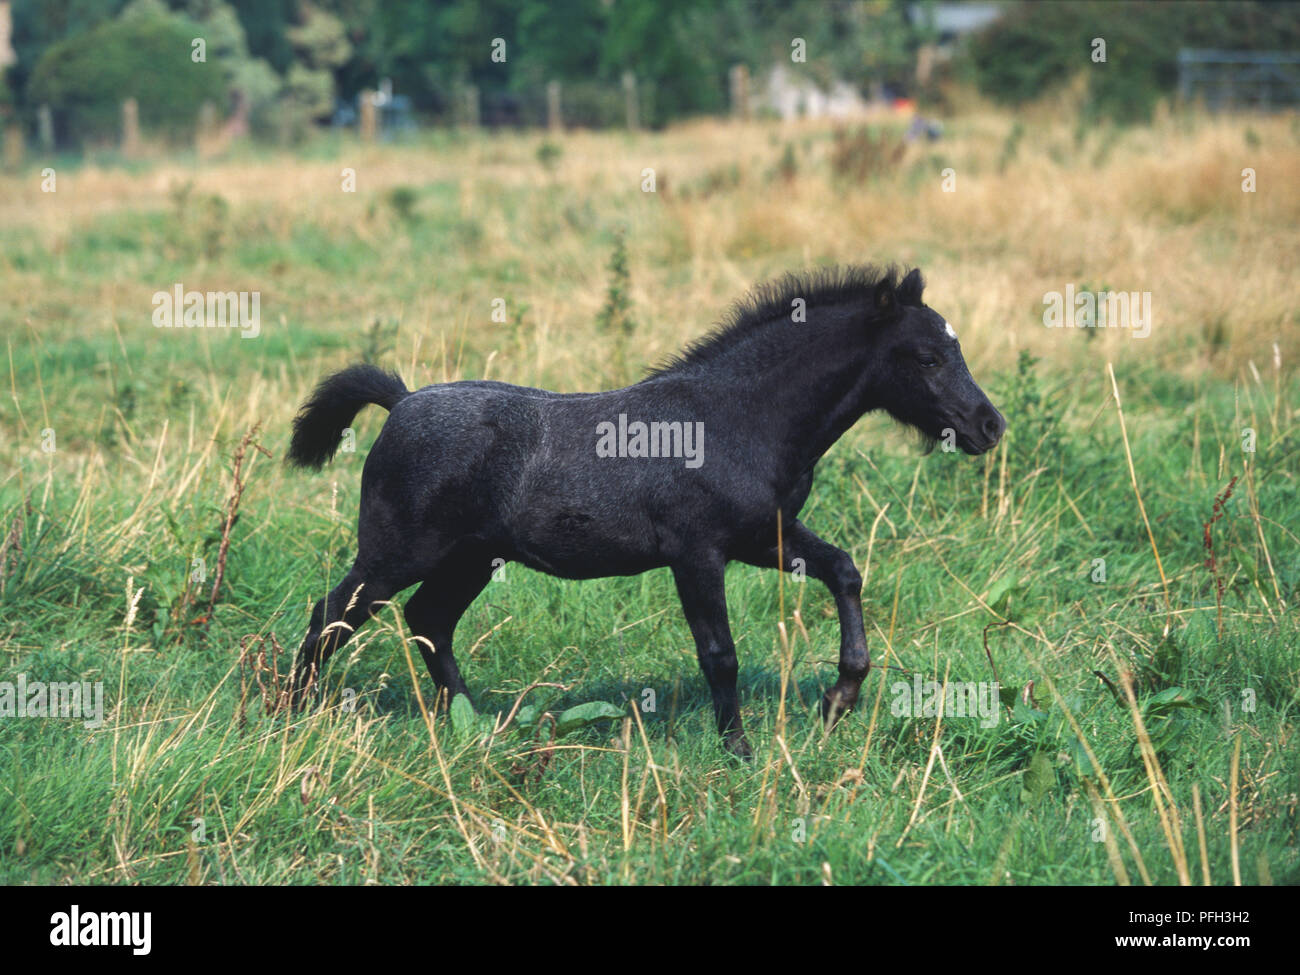 Black Colt (Equus caballus) trotting in green field, side view Stock Photo